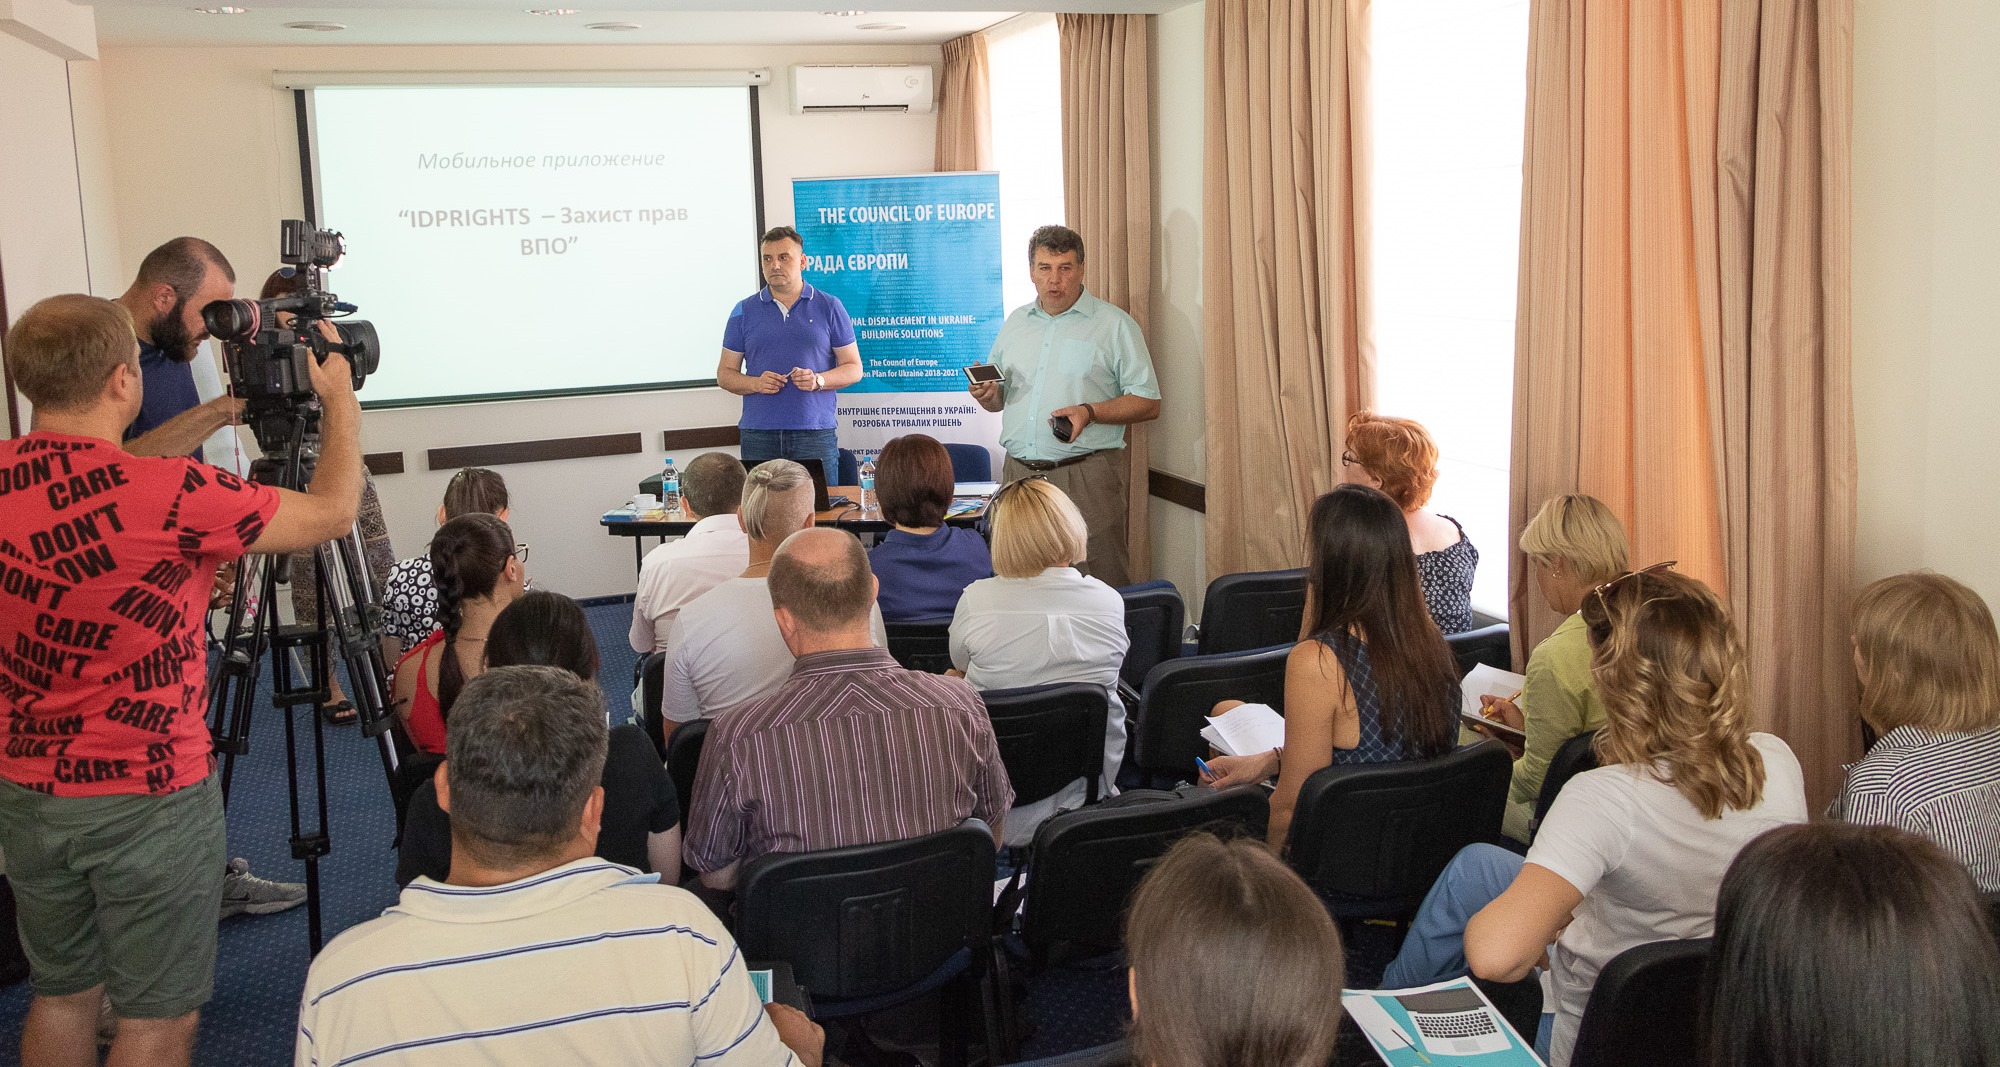 Presentations of the application “IDPRights” held in Zaporizhia, Pavlograd and Mariupol